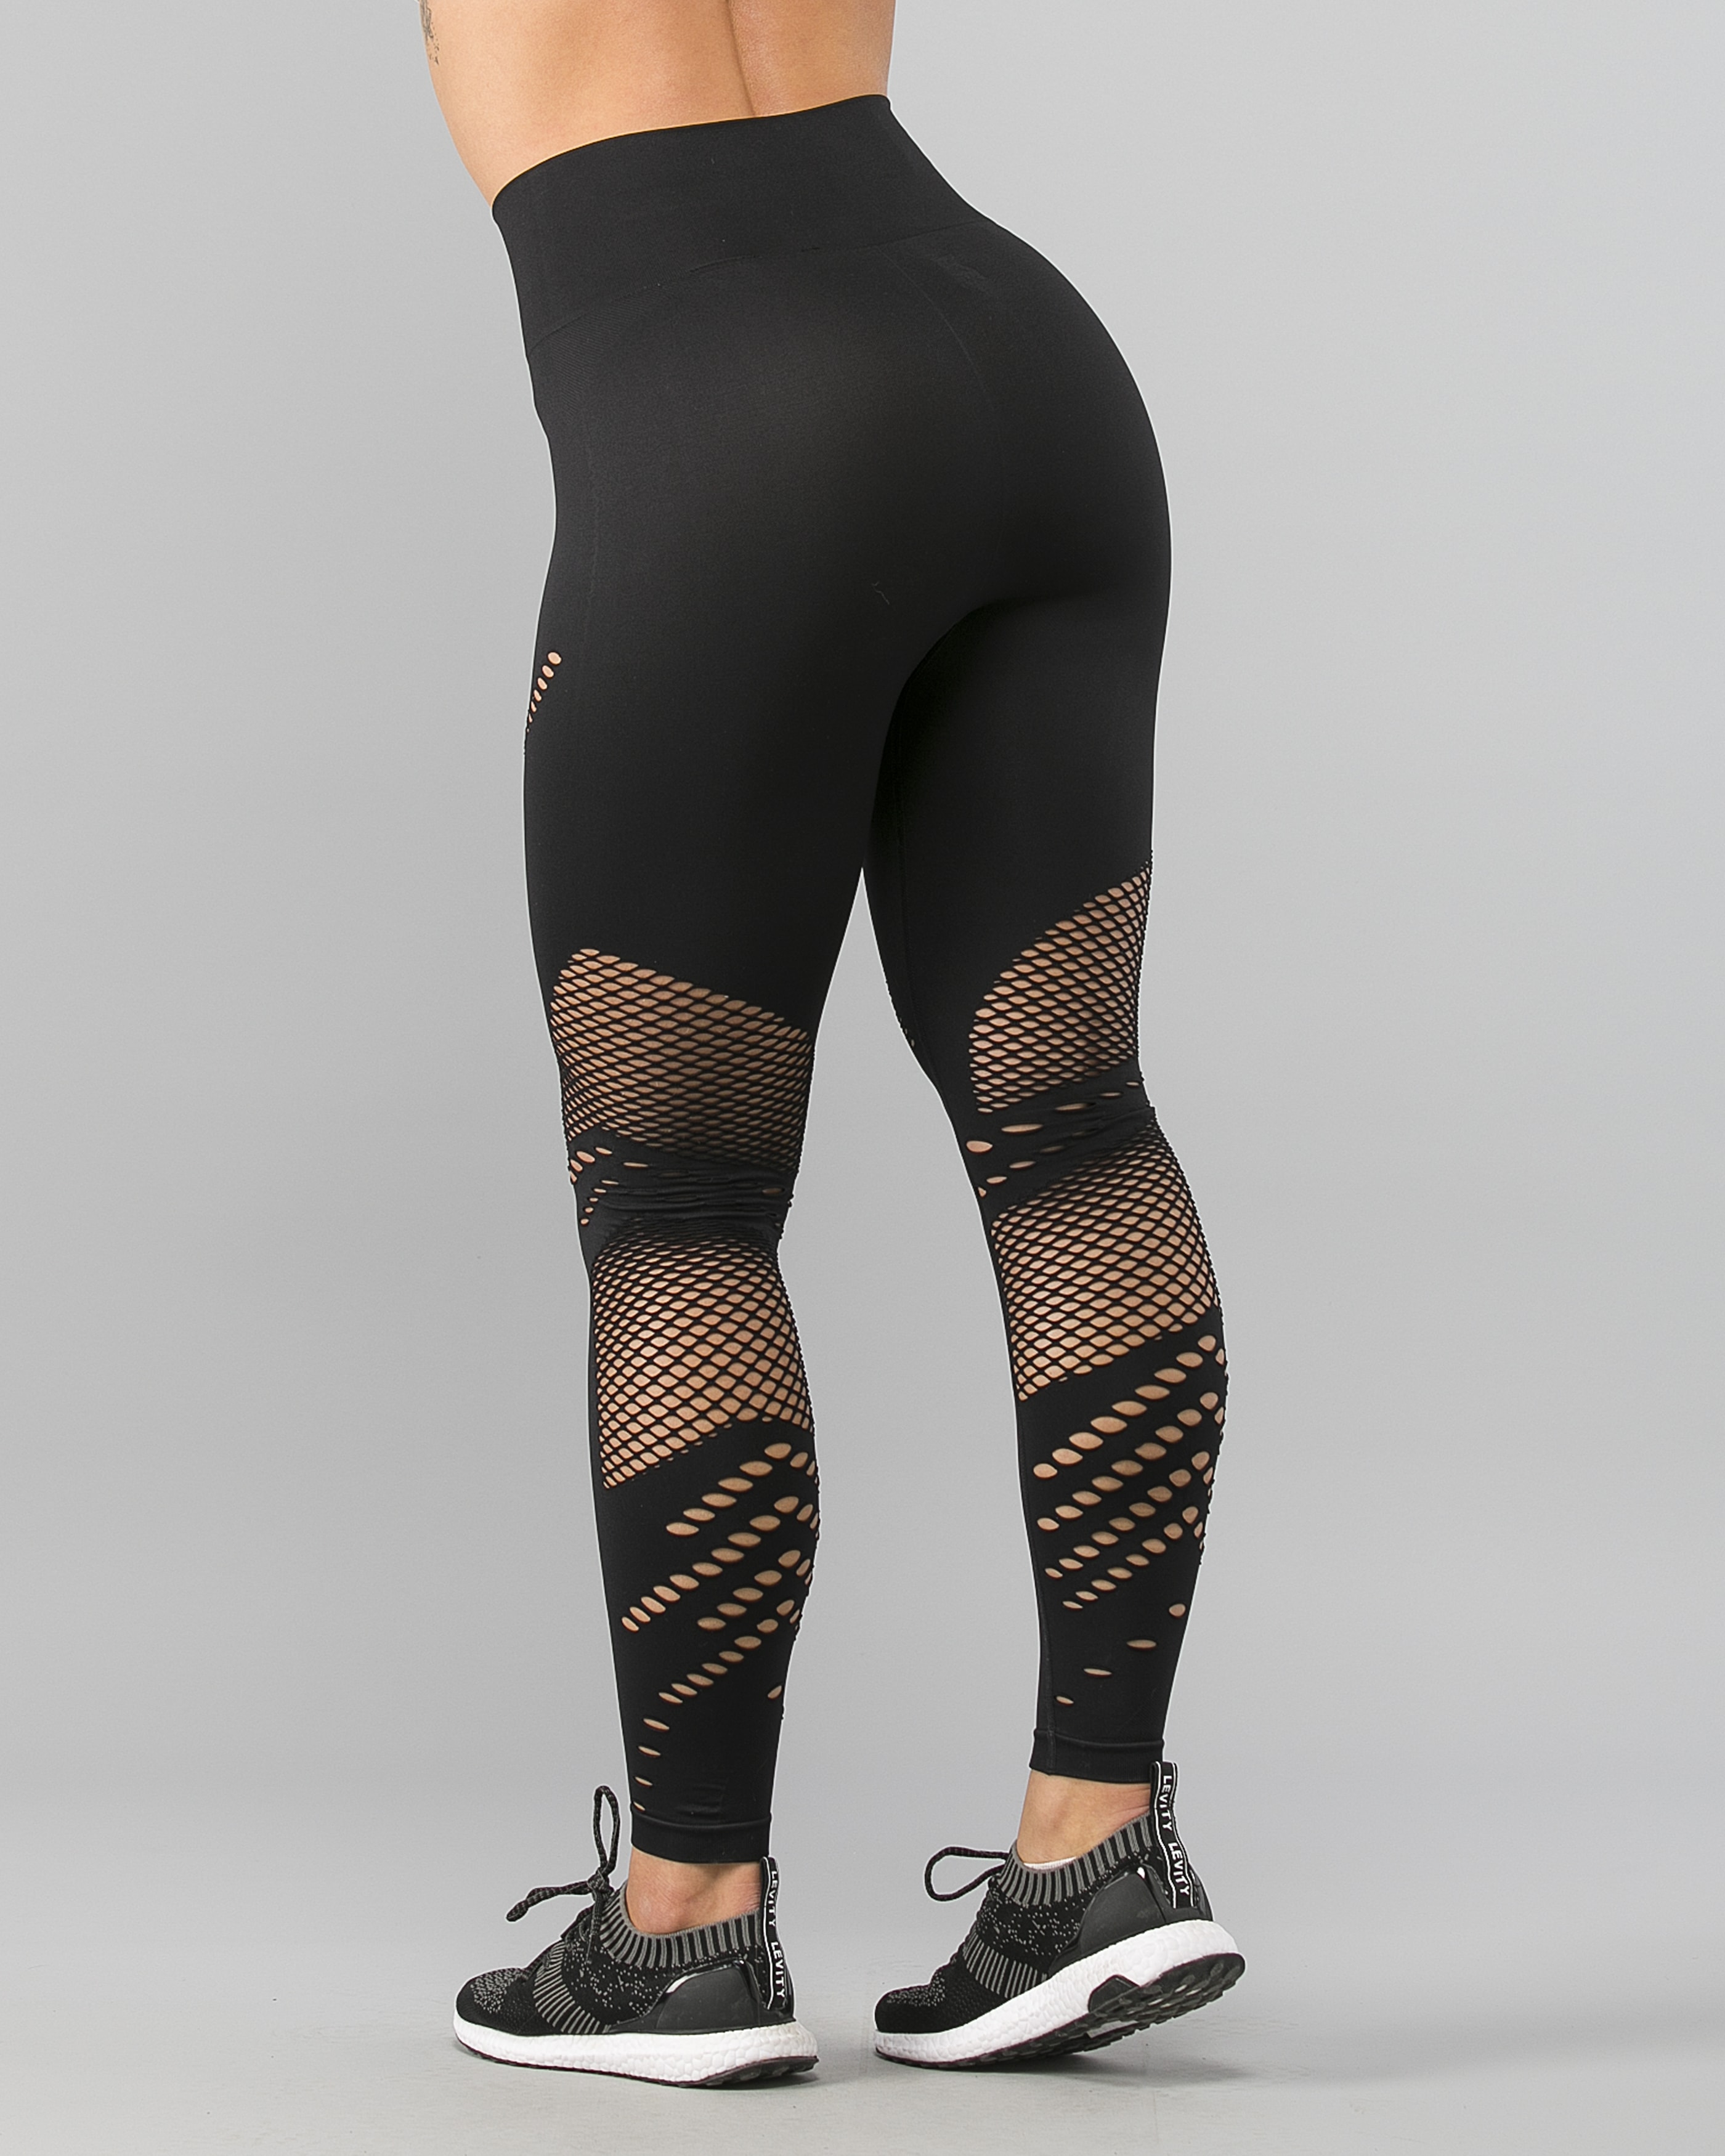 https://www.tights.no/wp-content/uploads/sites/7/2019/01/Better-Bodies-Waverly-Tights%E2%80%93Black2.jpg